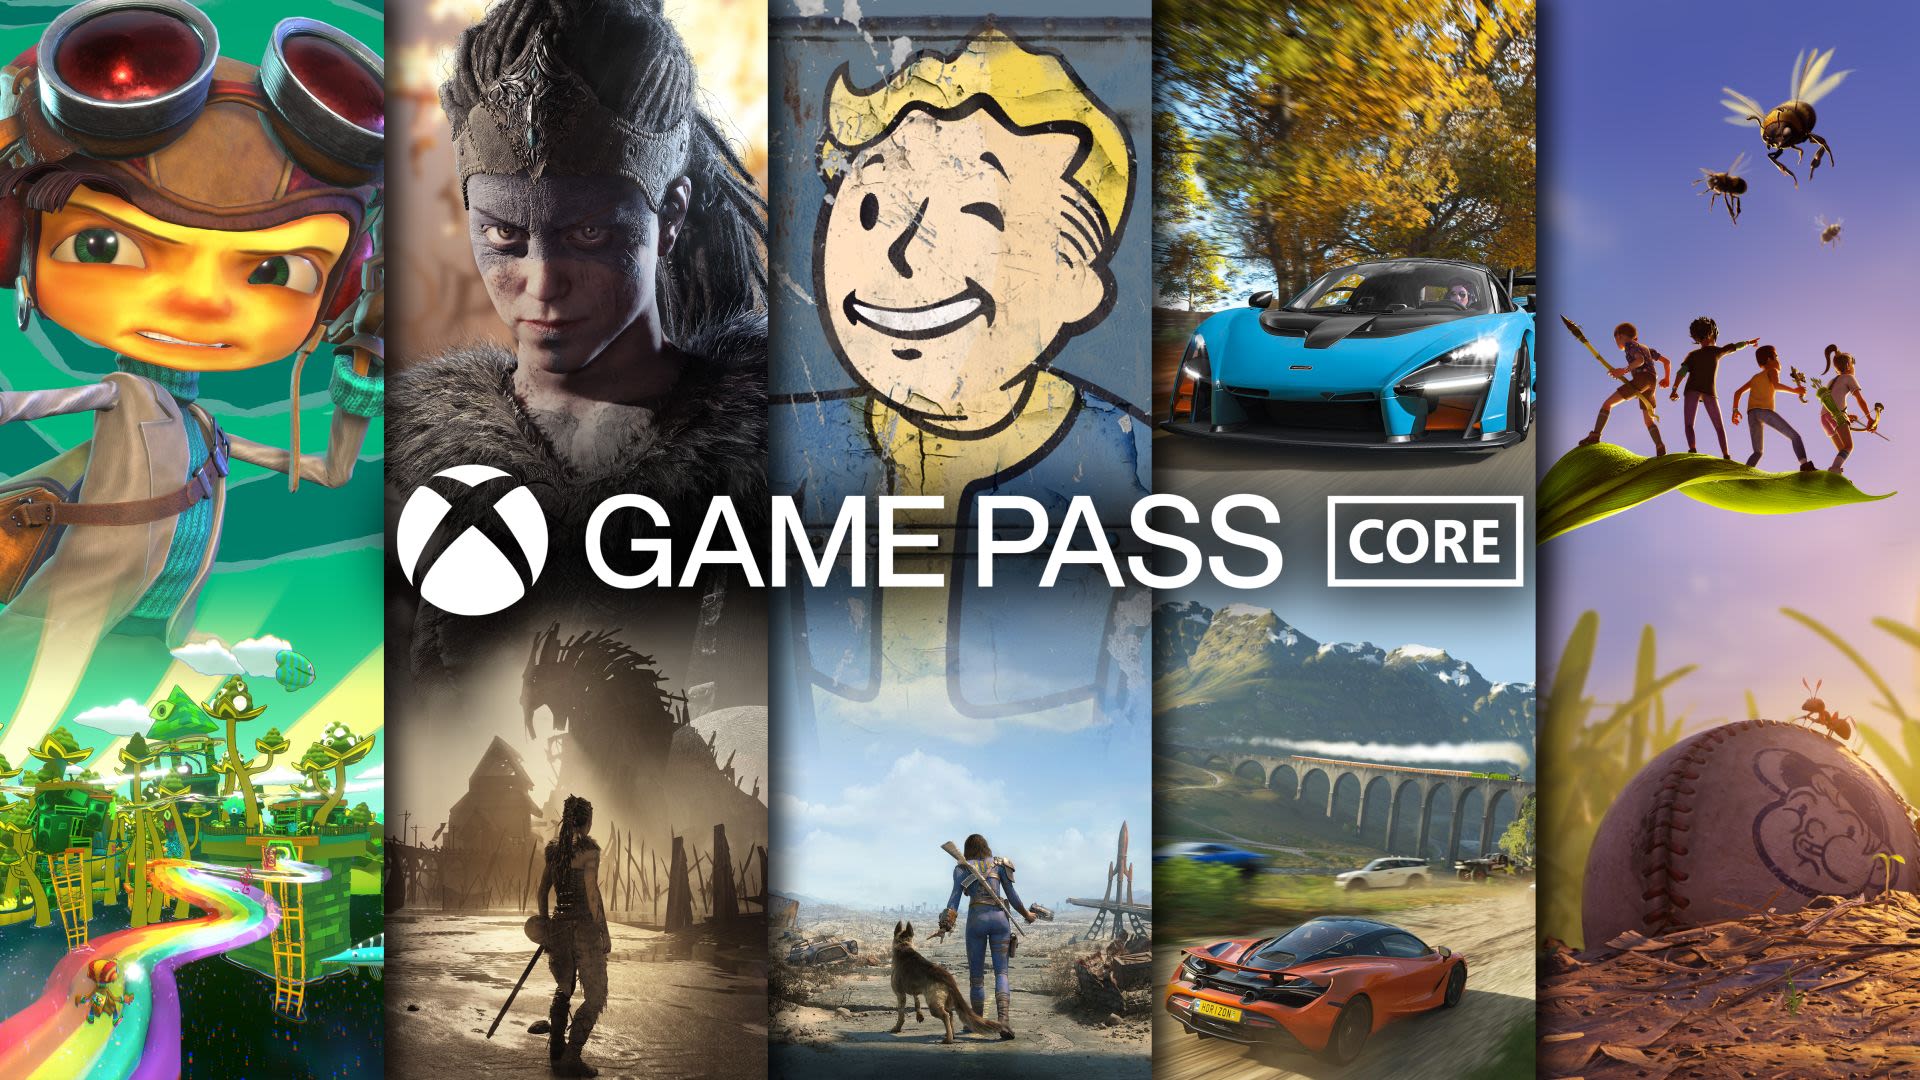 Xbox Game Pass for PC: Price, Games, Availability, and my thoughts